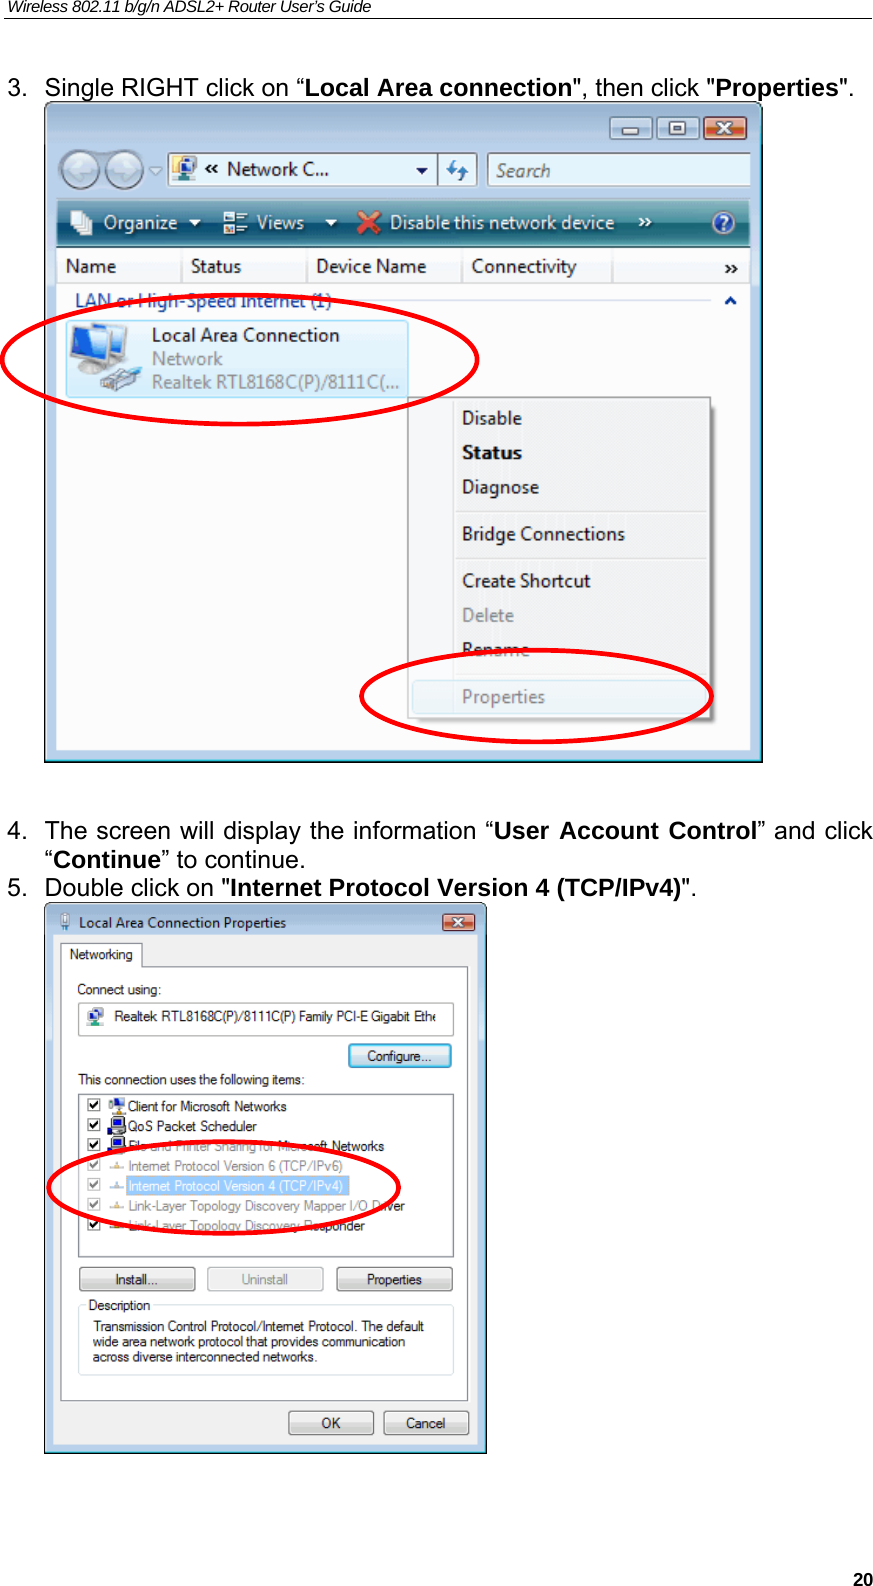 Wireless 802.11 b/g/n ADSL2+ Router User’s Guide    3.  Single RIGHT click on “Local Area connection&quot;, then click &quot;Properties&quot;.   4.  The screen will display the information “User Account Control” and click    “Continue” to continue. 5.  Double click on &quot;Internet Protocol Version 4 (TCP/IPv4)&quot;.    20